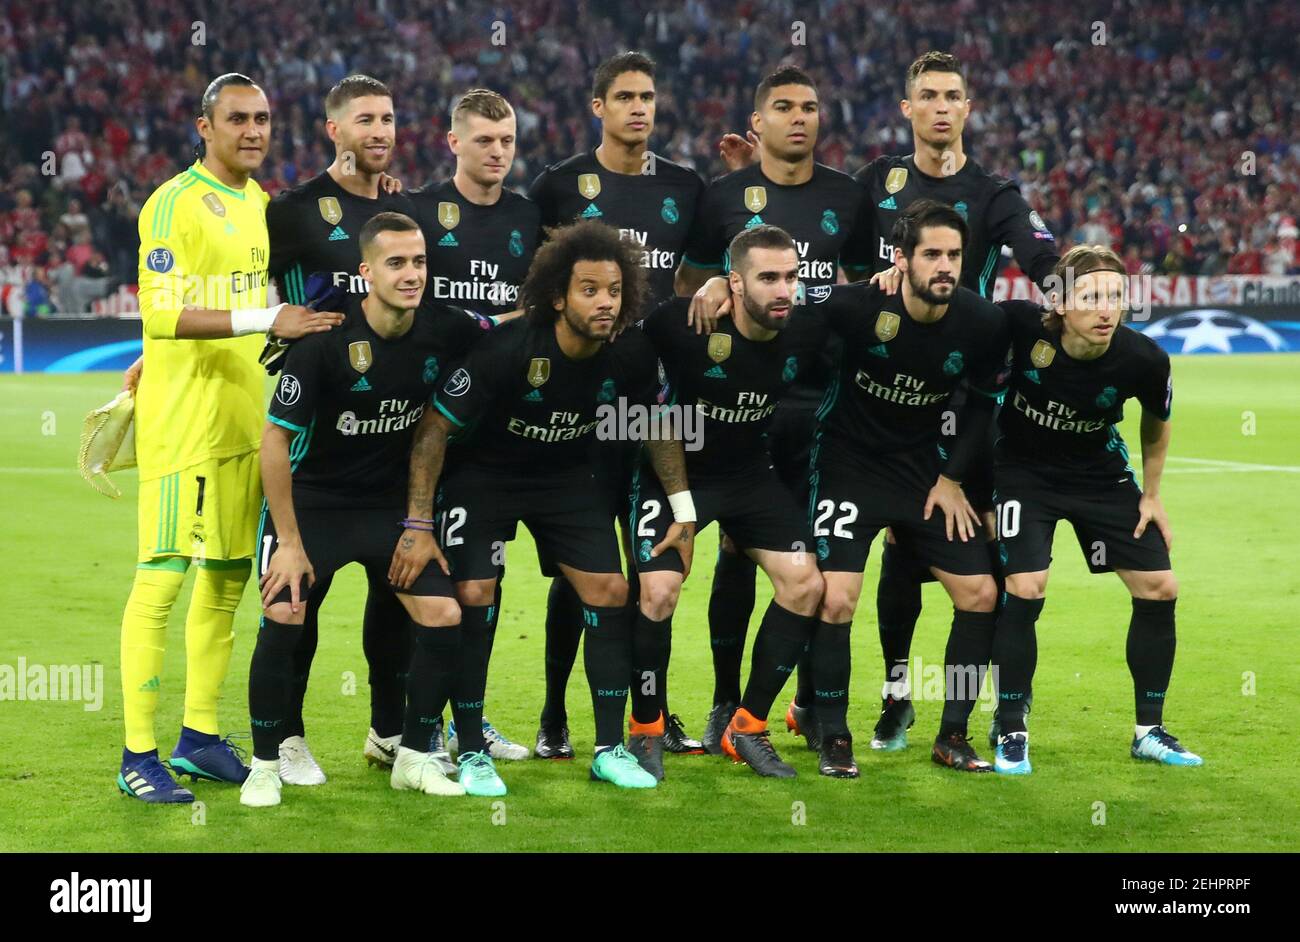 Soccer Football - Champions League Semi Final First Leg - Bayern Munich vs Real Madrid - Allianz Arena, Munich, Germany - April 25, 2018   Real Madrid players pose for a team group photo before the match    REUTERS/Michael Dalder Stock Photo